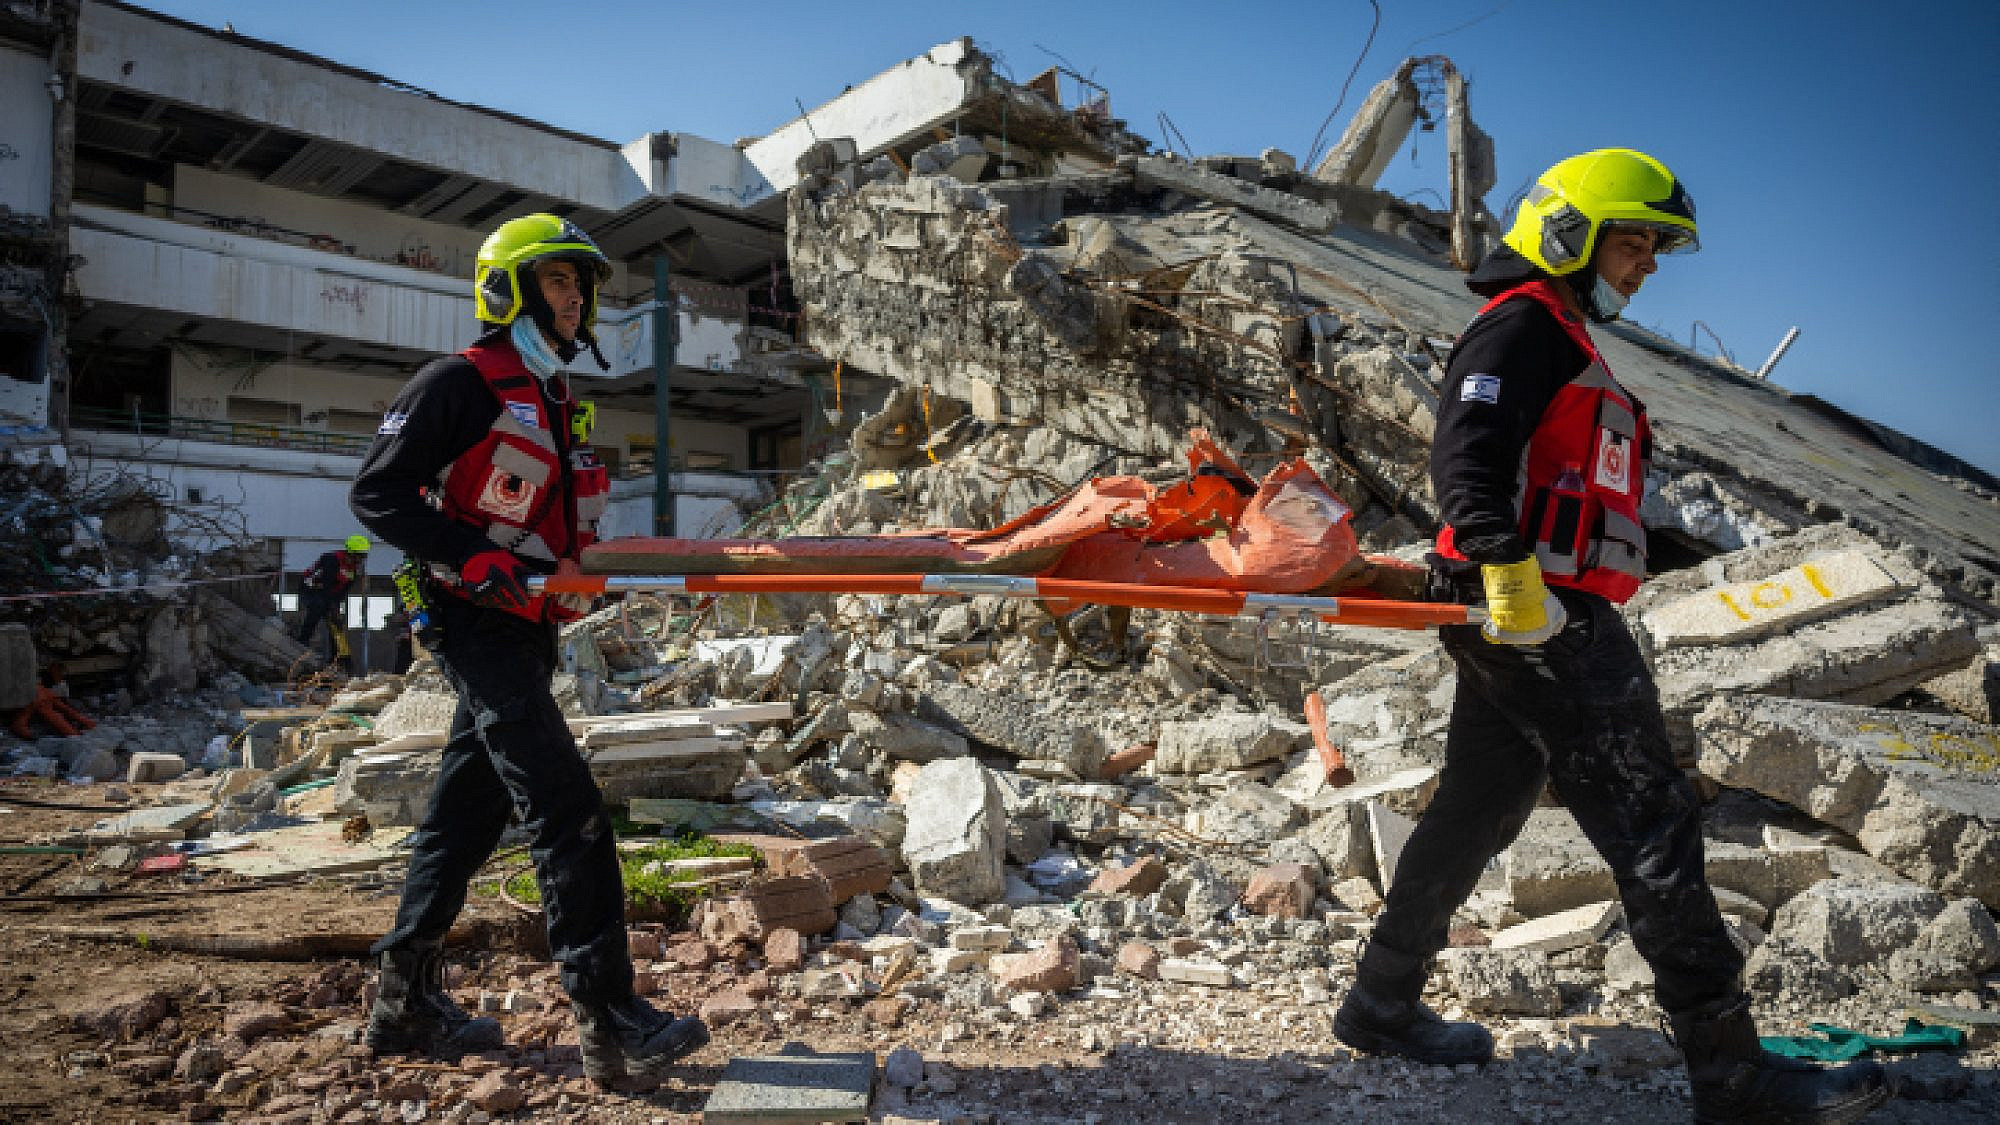 Firefighters, Jerusalem Emergency Department volunteers and IDF Home Front Command soldiers take part in a drill simulating a building collapse following an earthquake in Ma'ale Adumim, Feb. 14, 2023. Photo by Yonatan Sindel/Flash90.